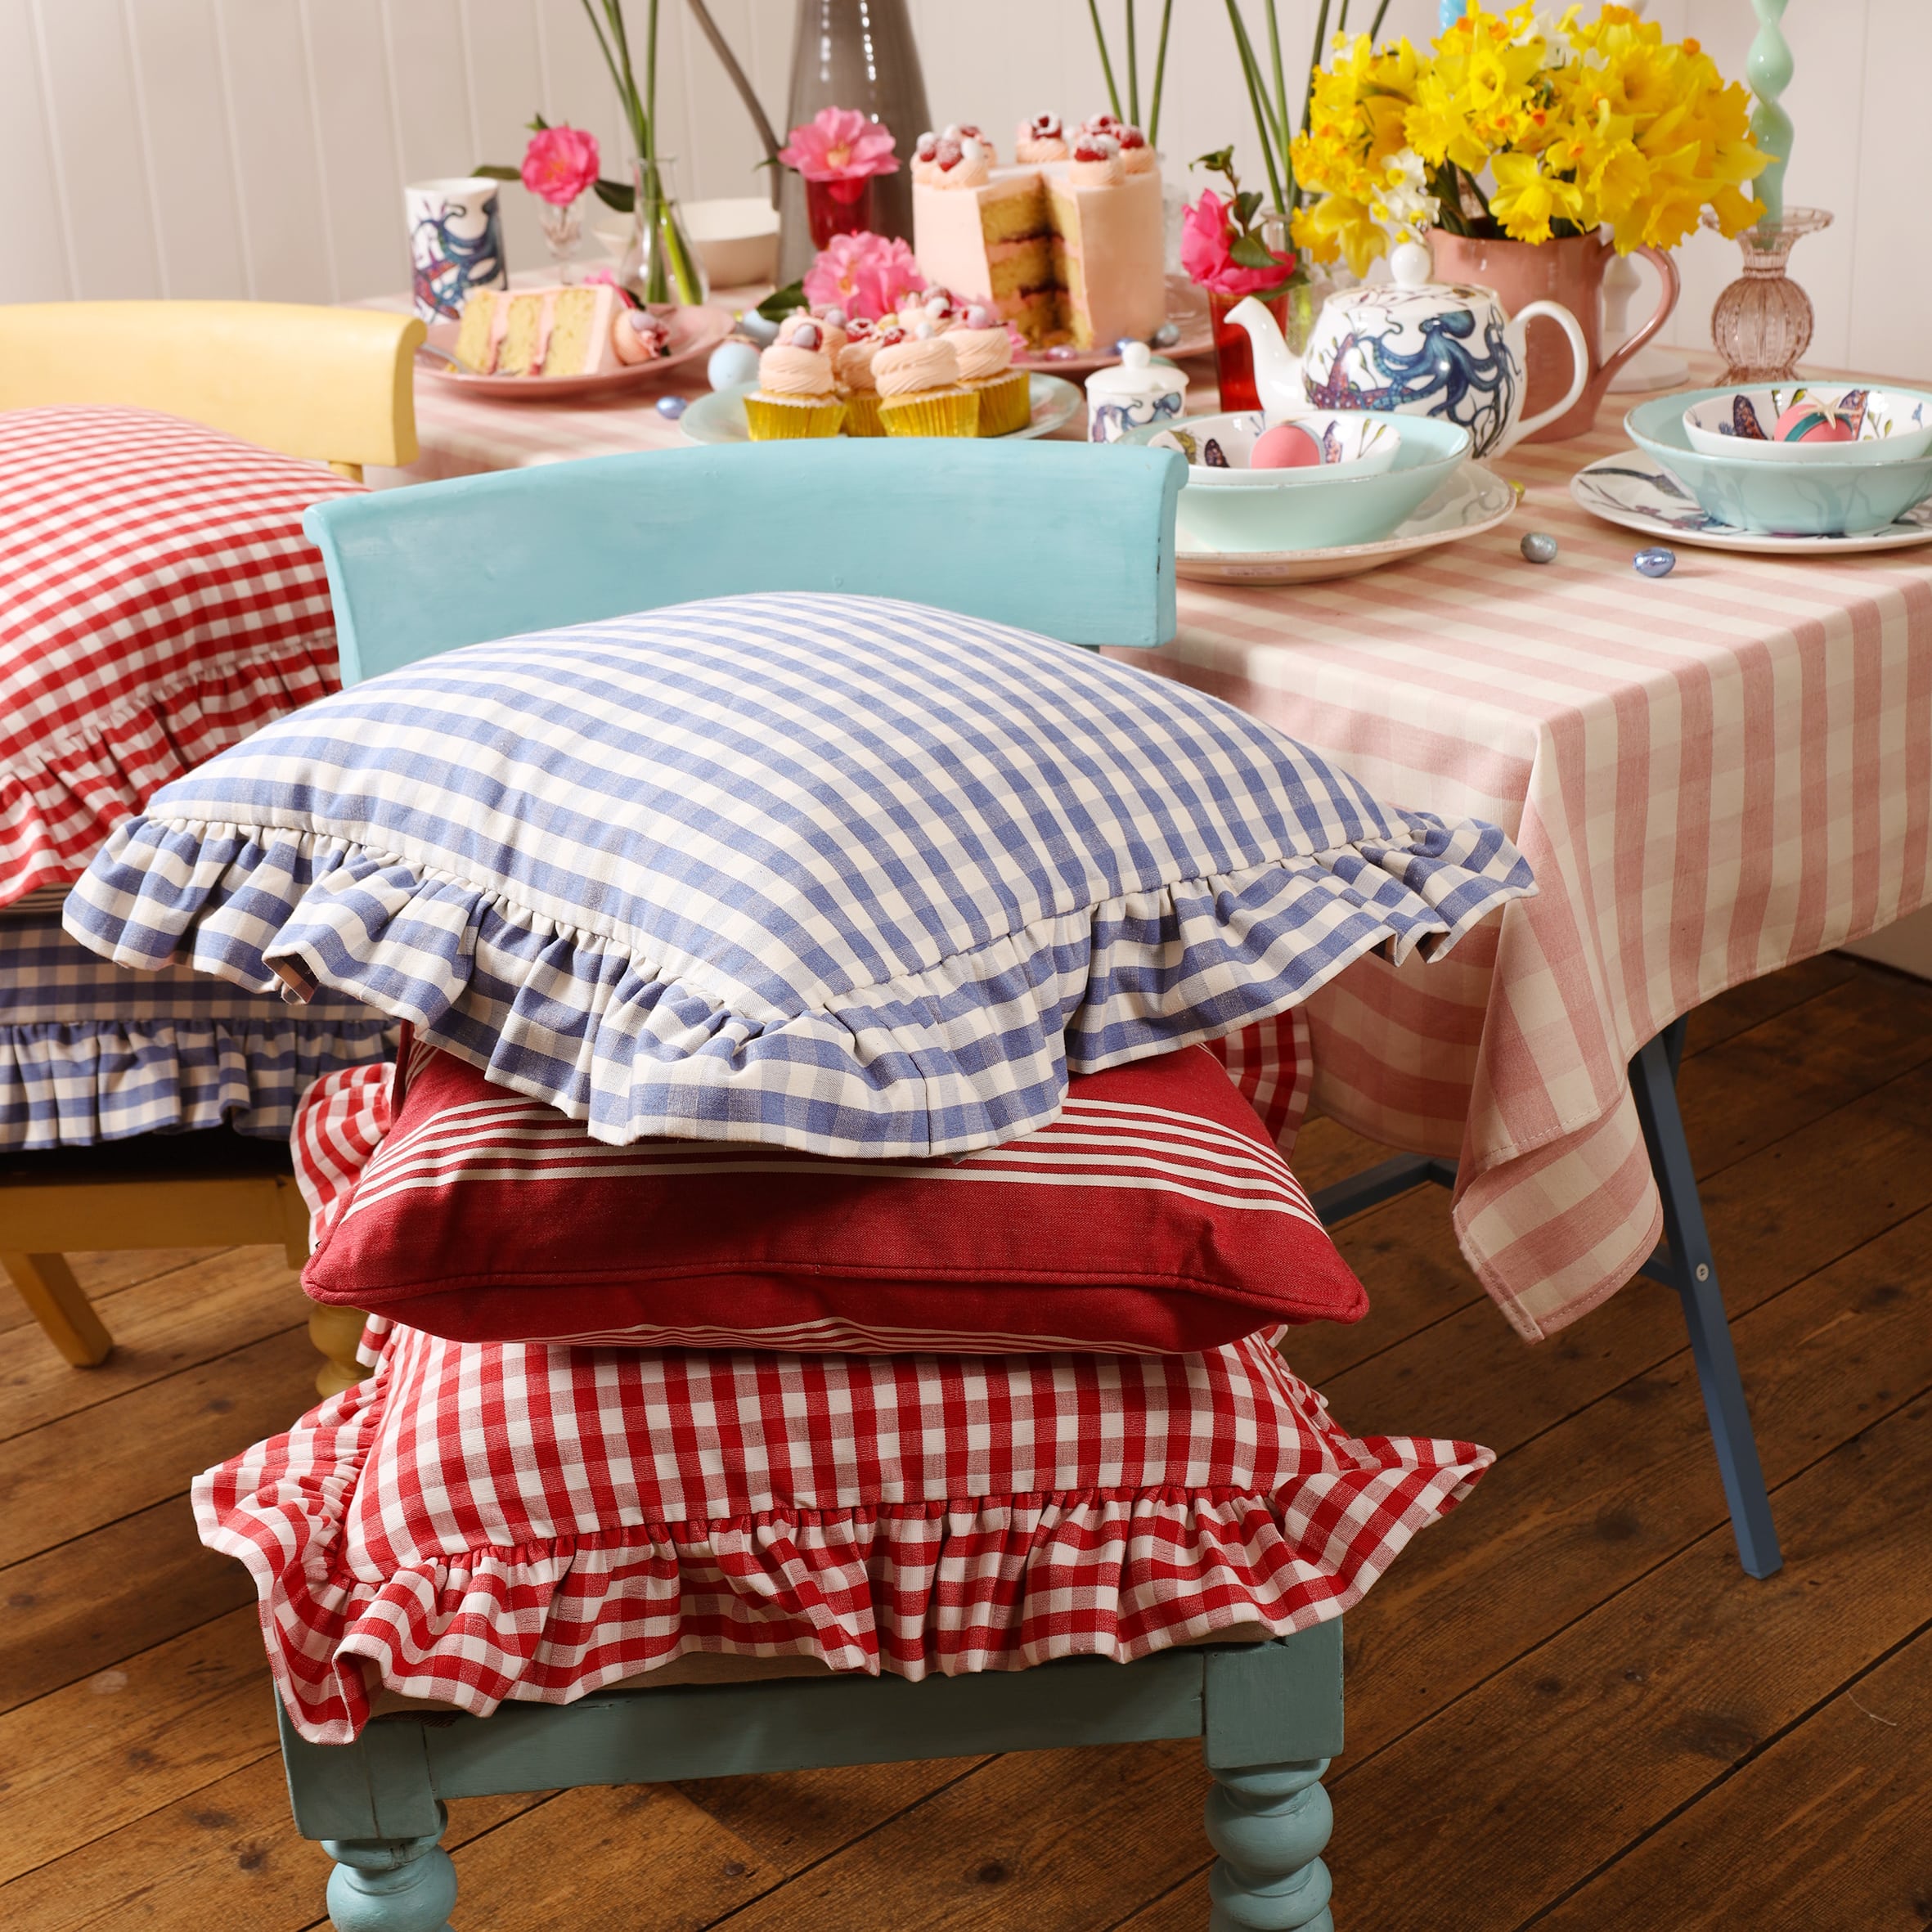 Blue and White Gingham cushion with a wide frill all around the edgeon other cushions including a Gingham cushion in red.Behind is a table dressed with a gingham tablecloth,on the tablecloth are lots of cupcakes,other cakes all placed on or around our Reef tableware.